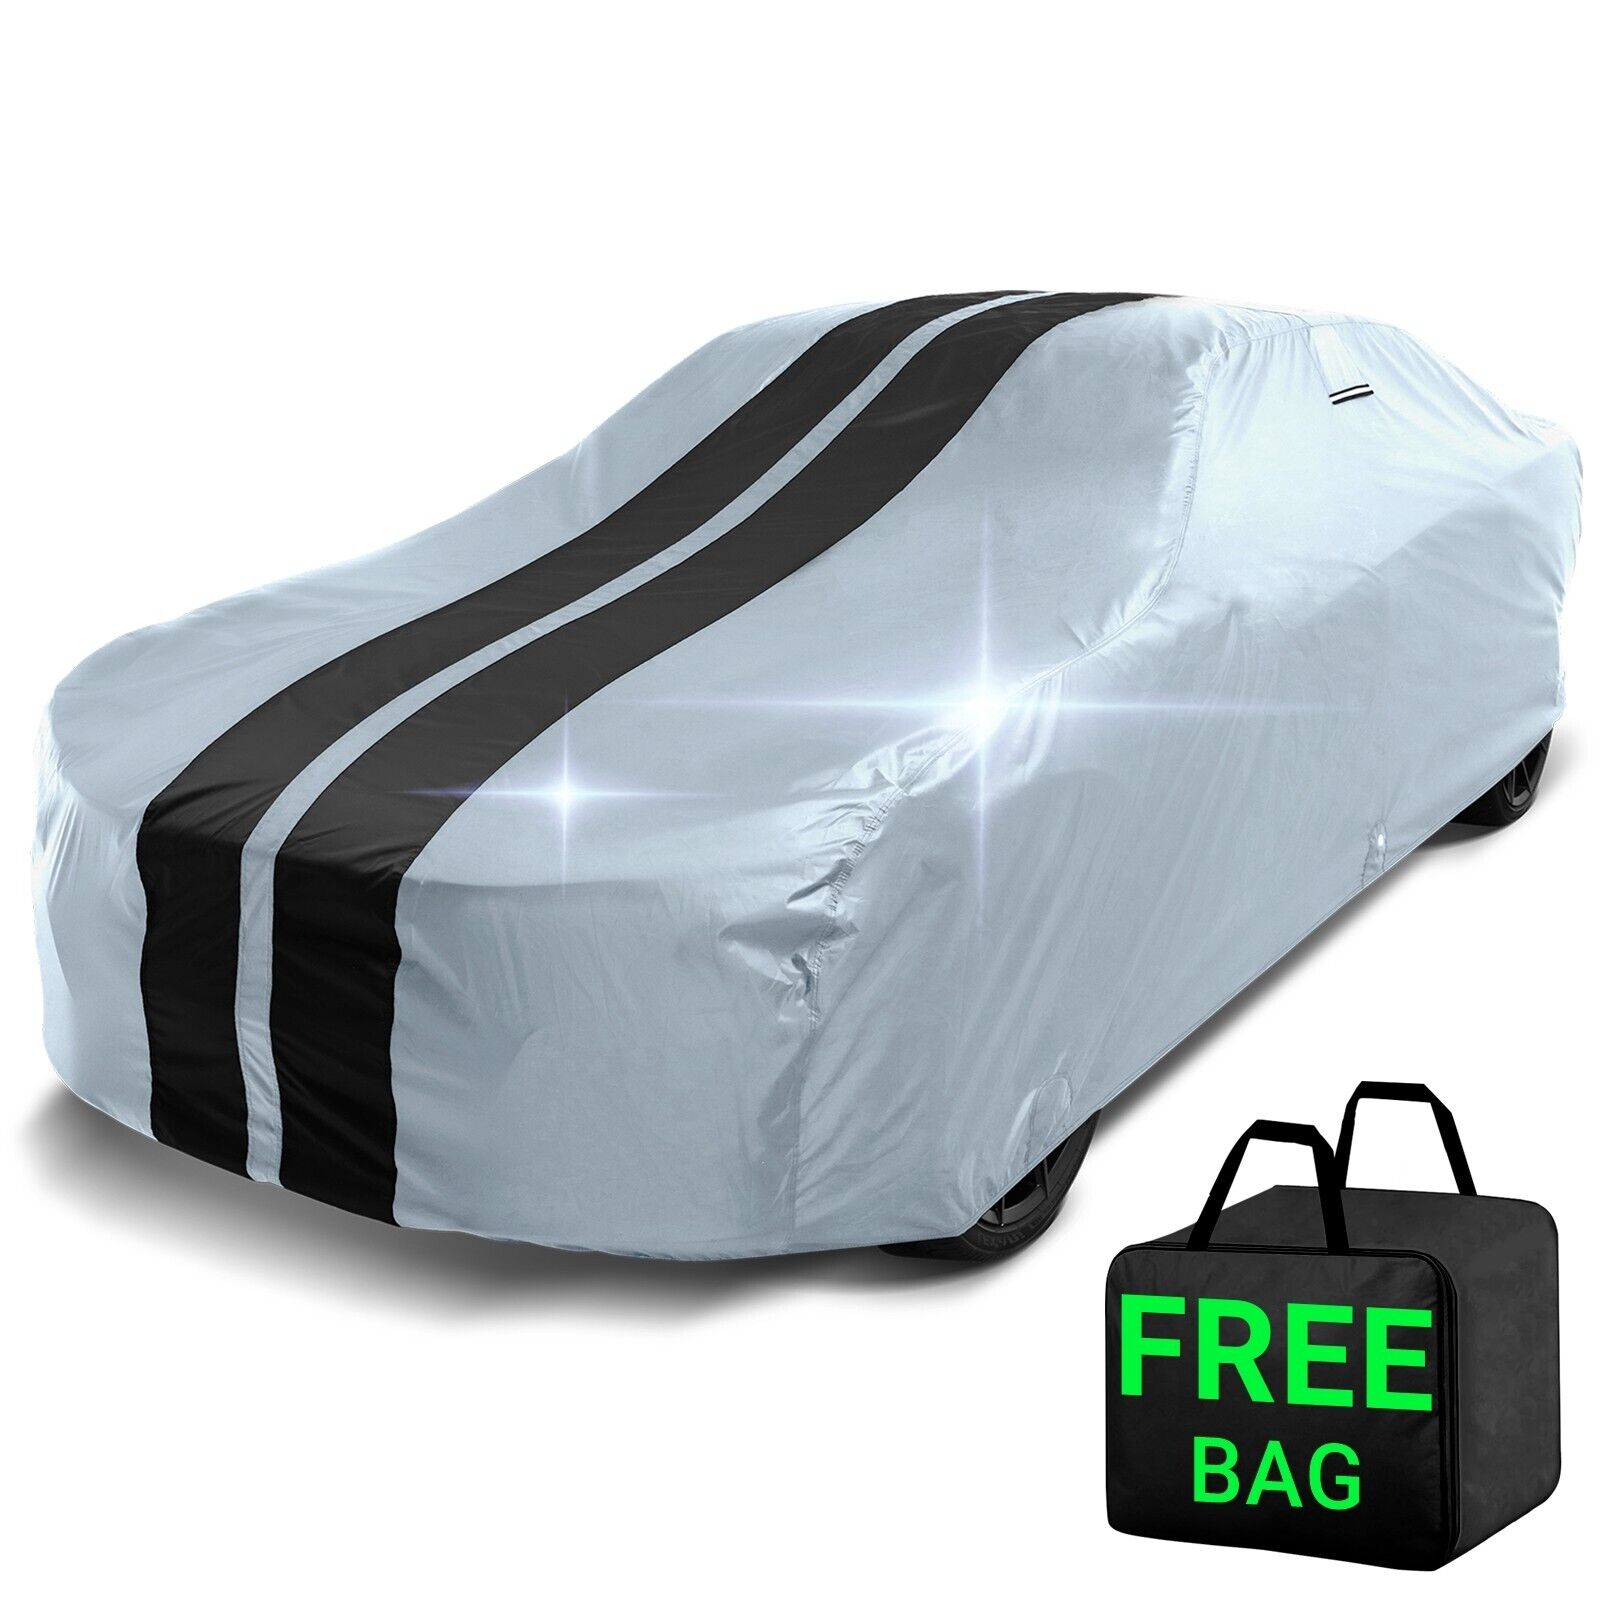 2006-2012 Tesla Roadster Custom Car Cover - All-Weather Waterproof Protection